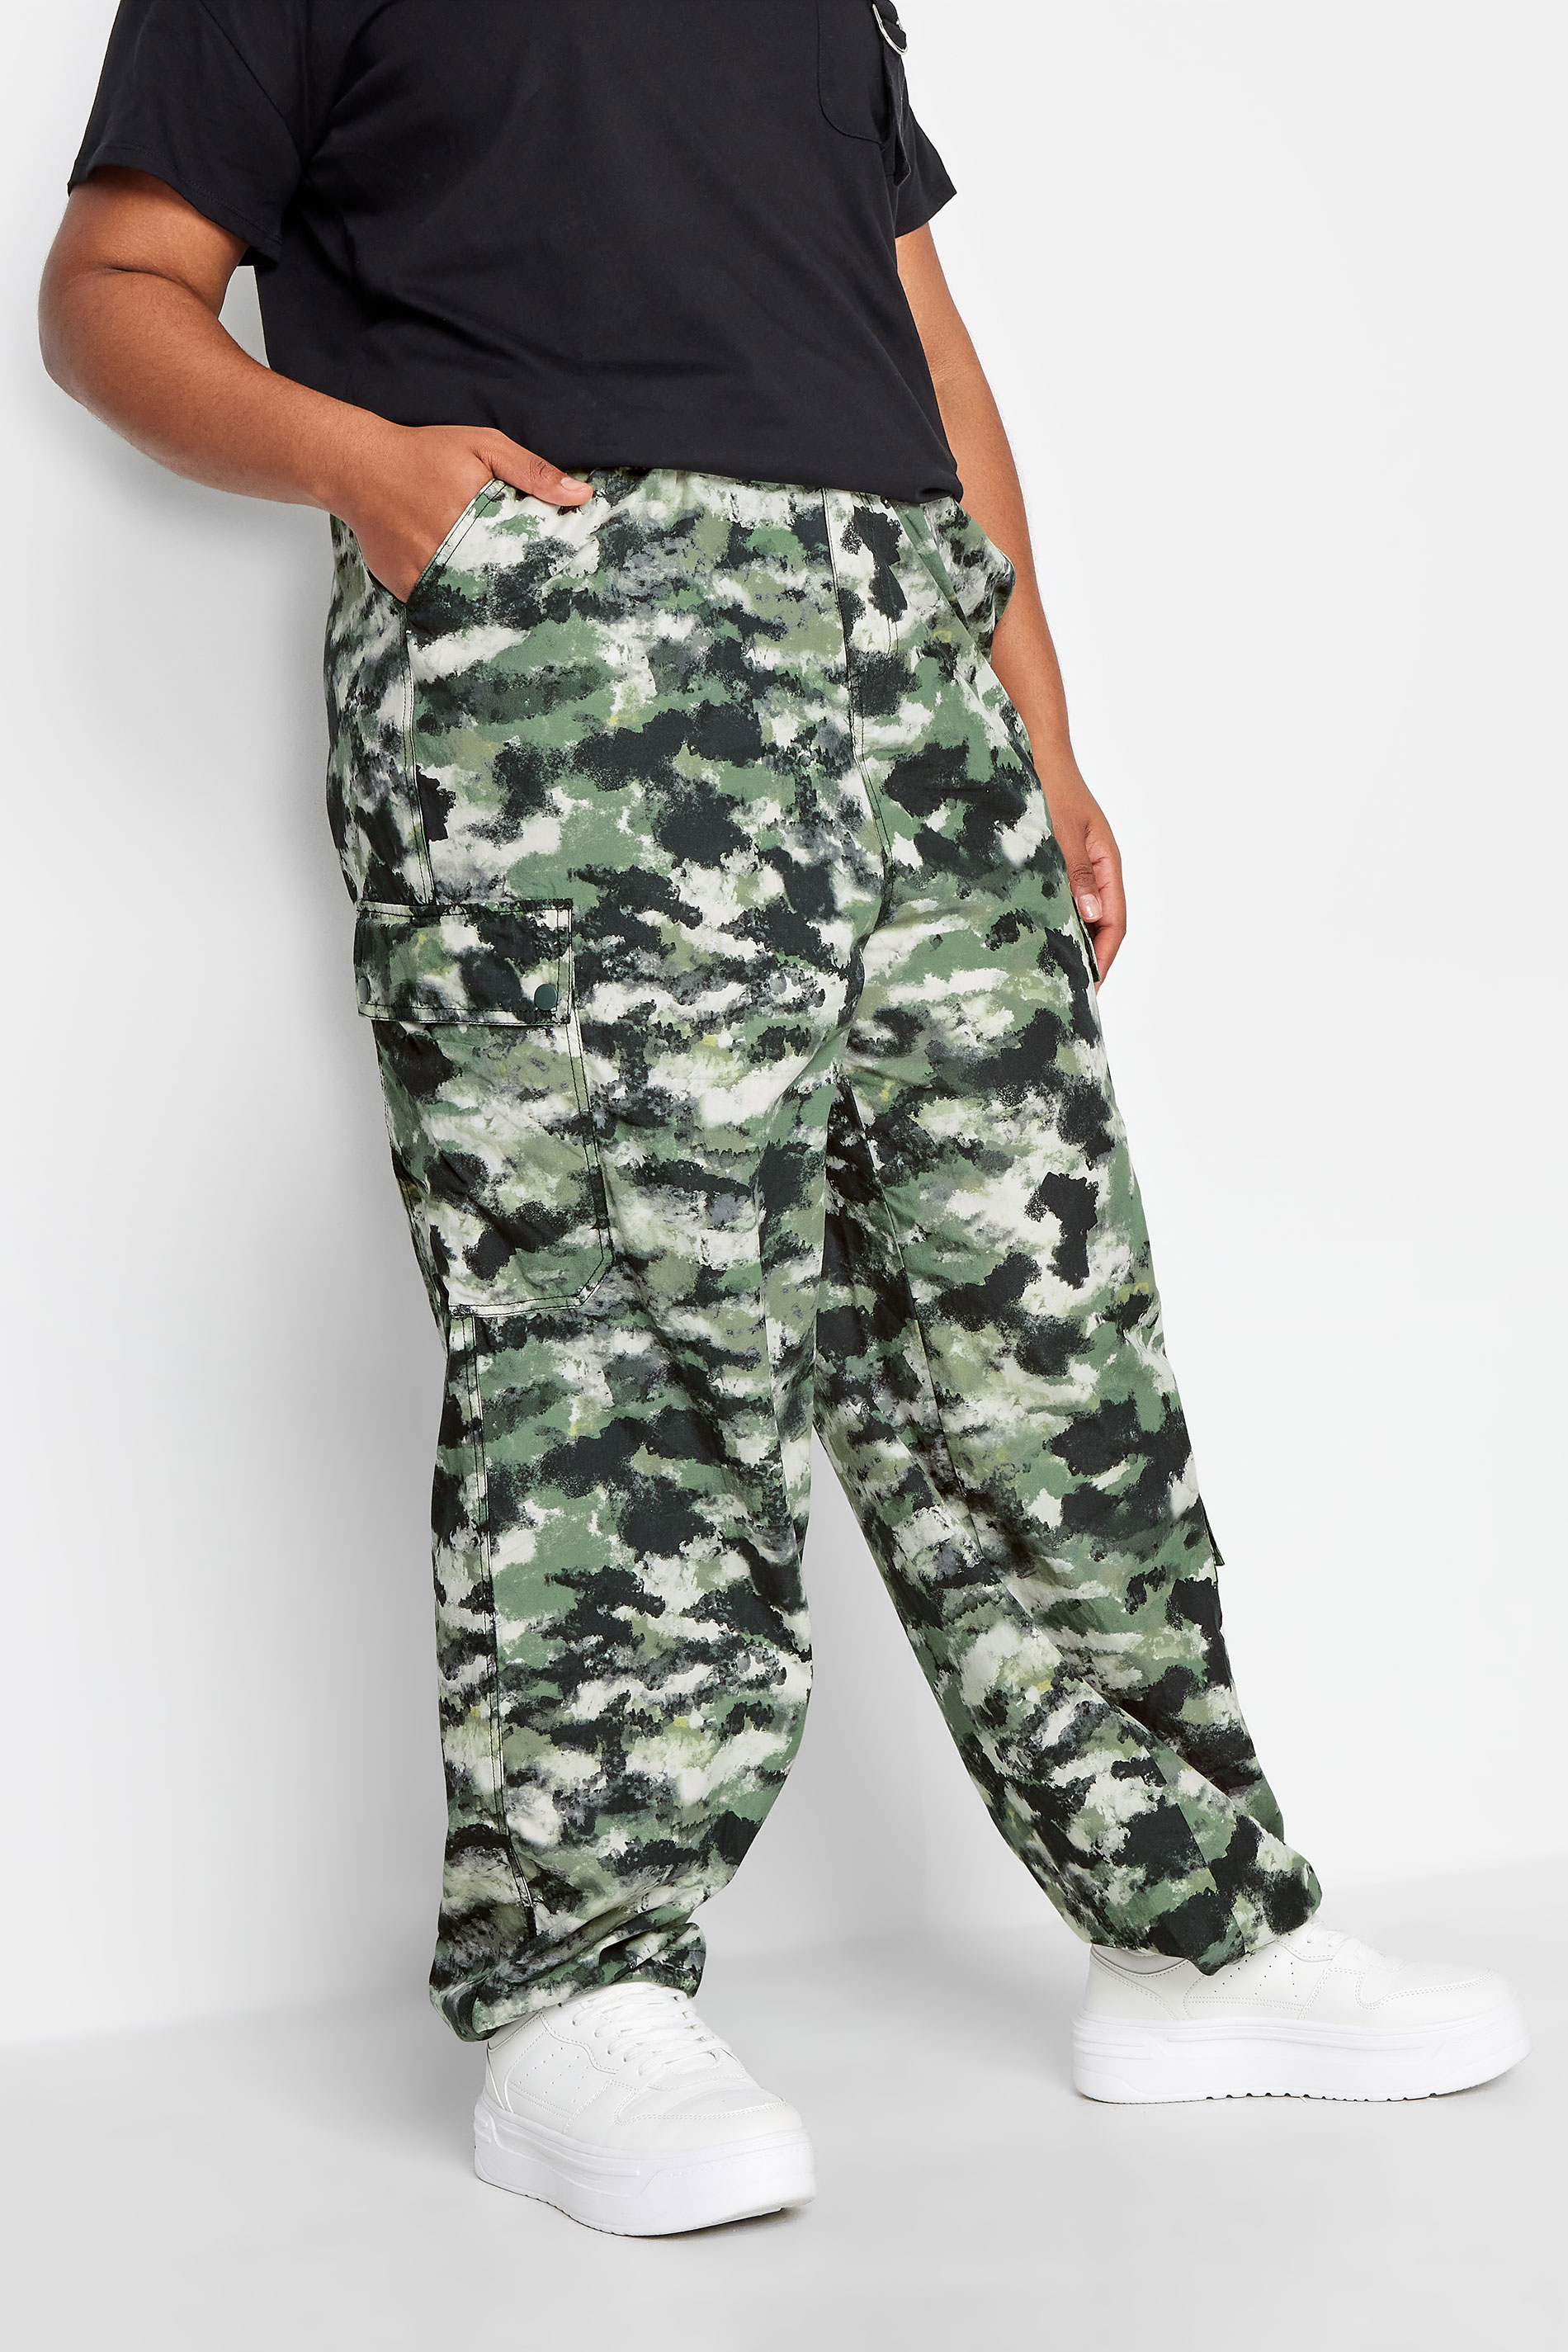 New Ladies Women's Army Print Cargo Trousers Camouflage Combat Miltary  Pants | eBay